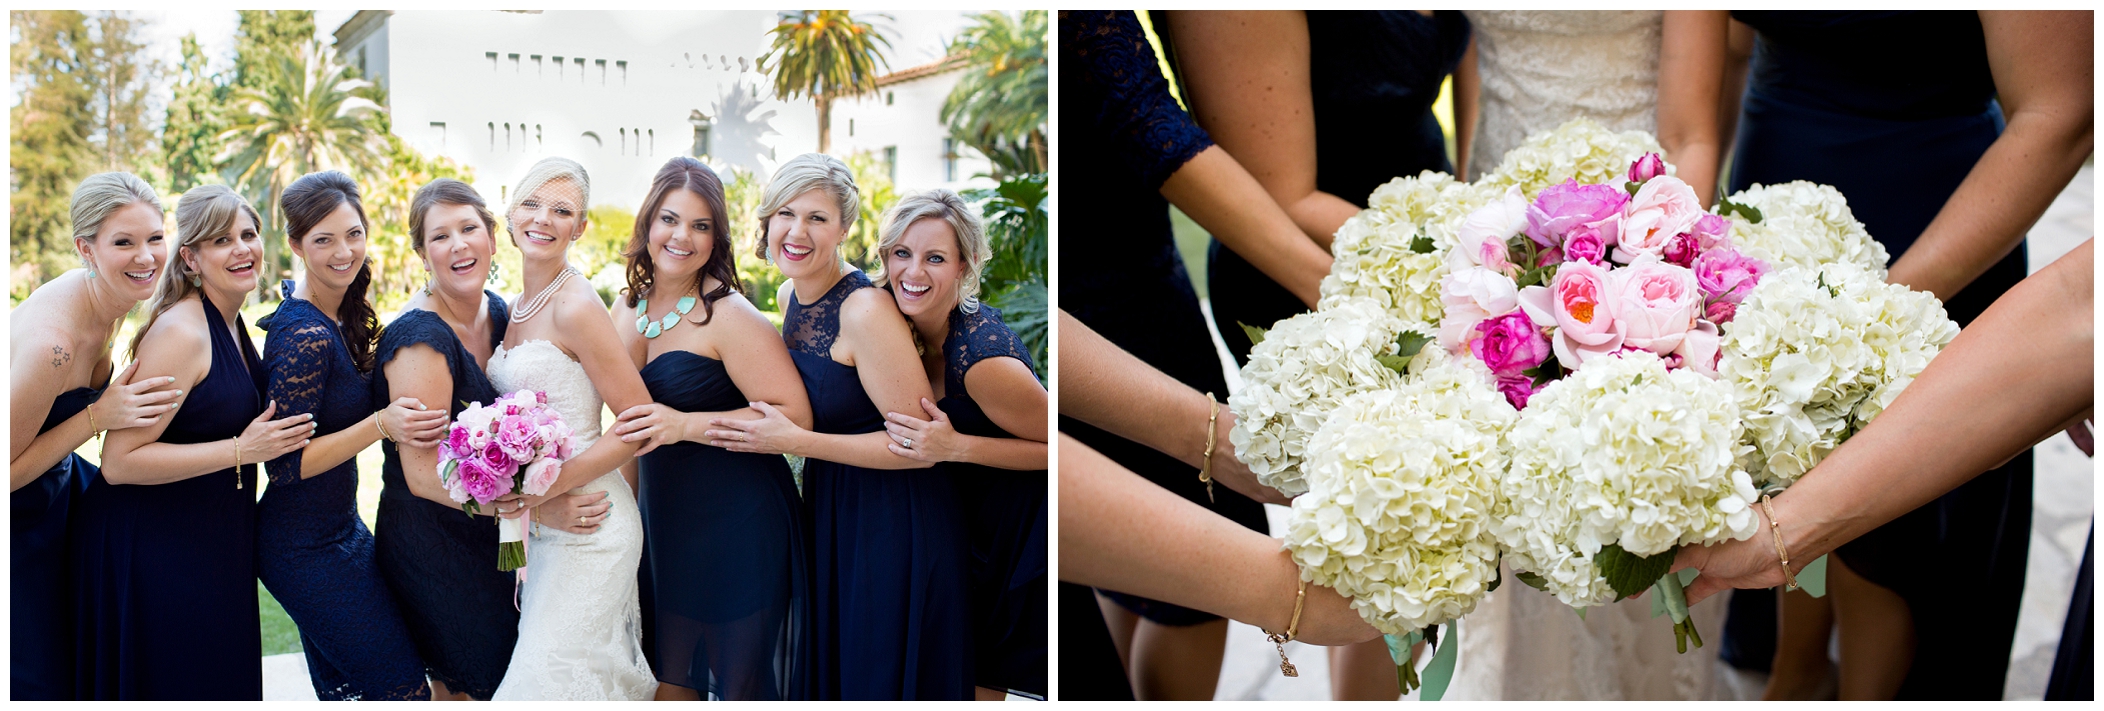 picture of bridesmaids in different navy dresses